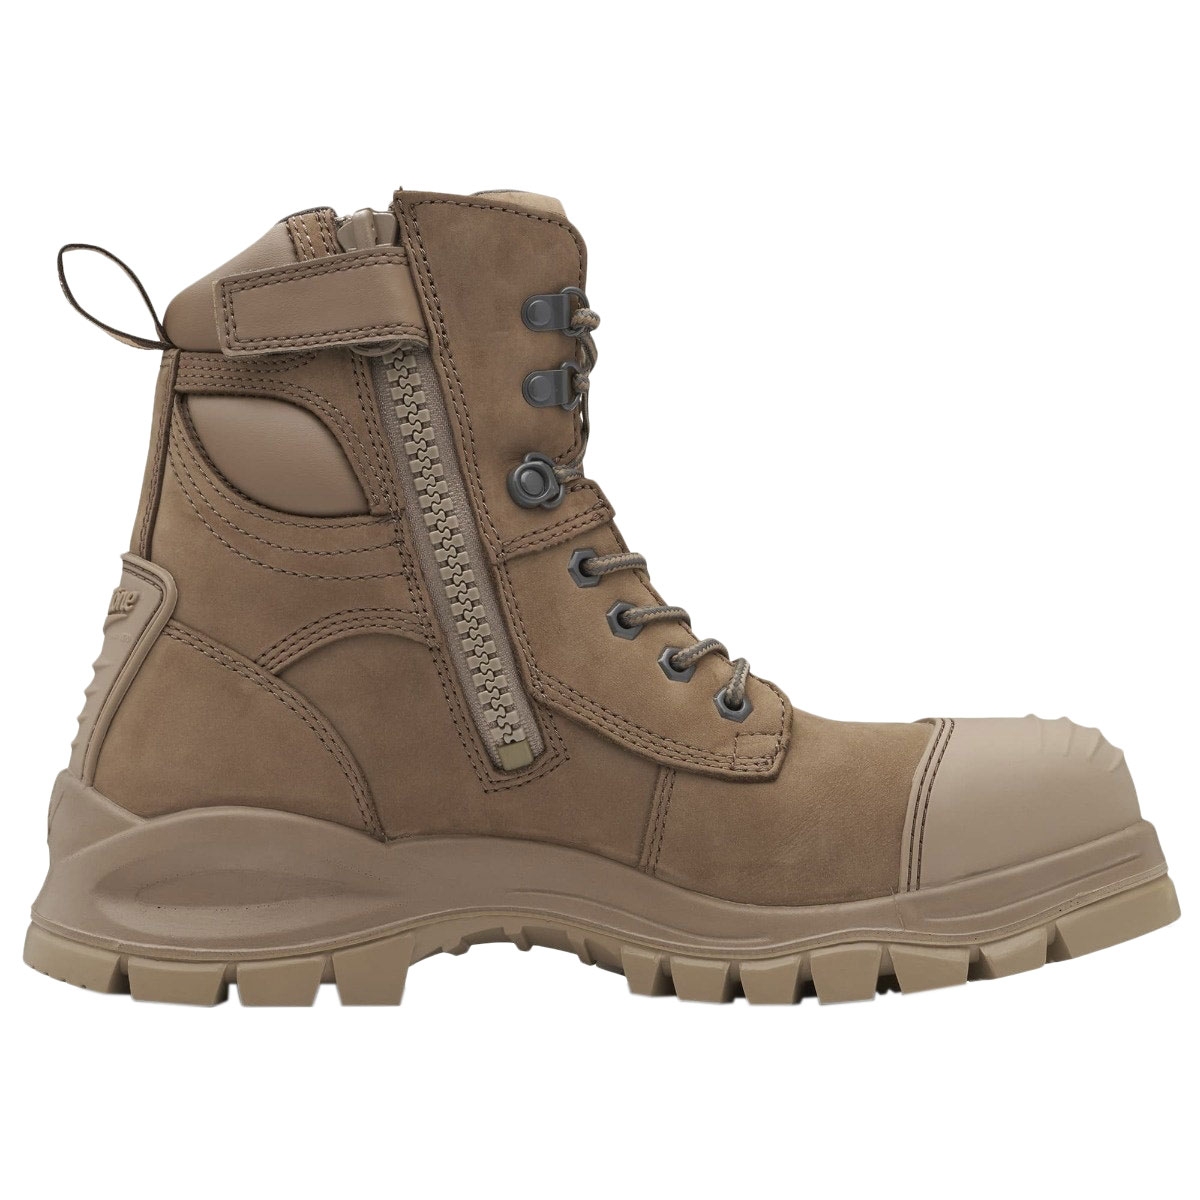 Blundstone 984 Safety Boots